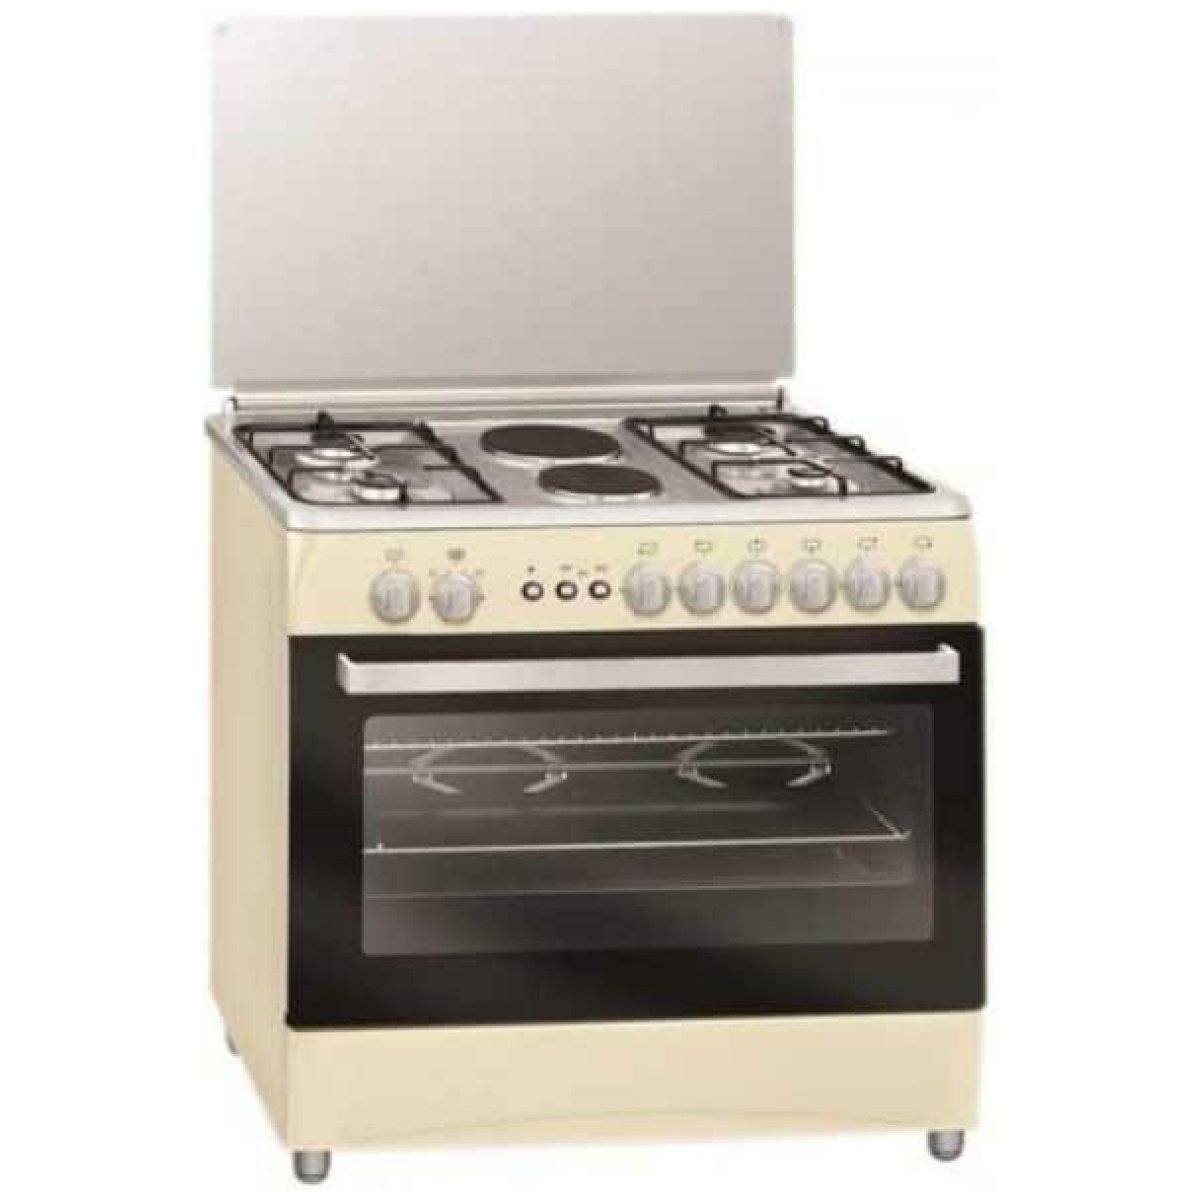 Scanfrost K 9426 NE 90X60 CMS 4 GAS BURNERS + 2 HOT PLATES WITH ELECTRIC OVEN GRILL AND TURNSPIT WITH CREAM FINISH